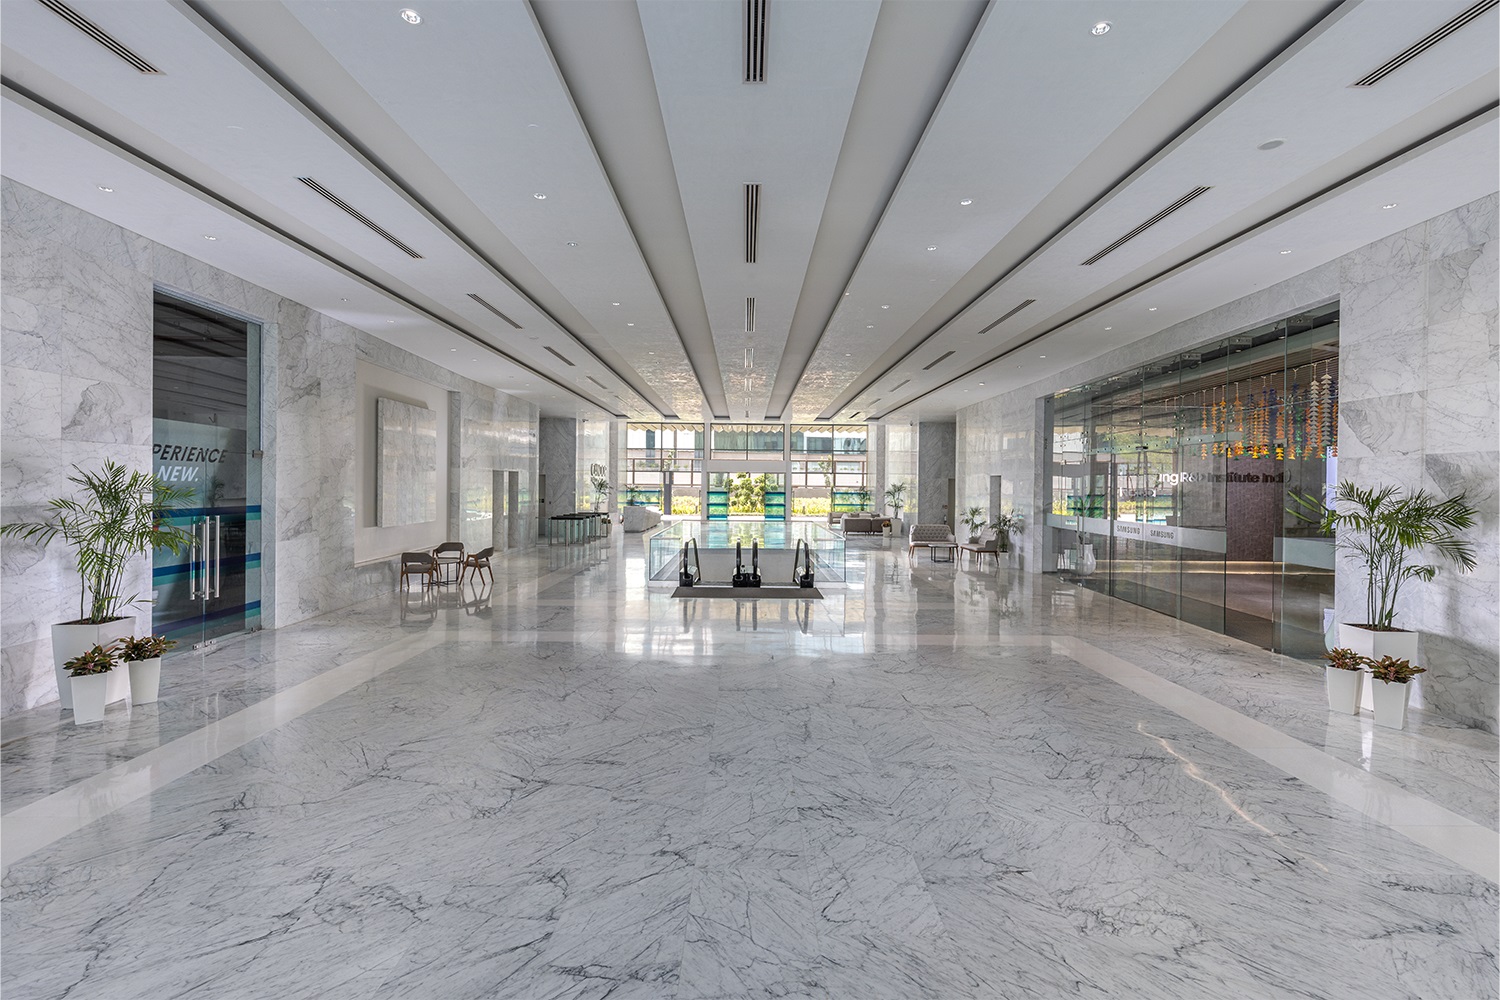 Candor TechSpace interior foyer made of white marble with black detail and near escalators